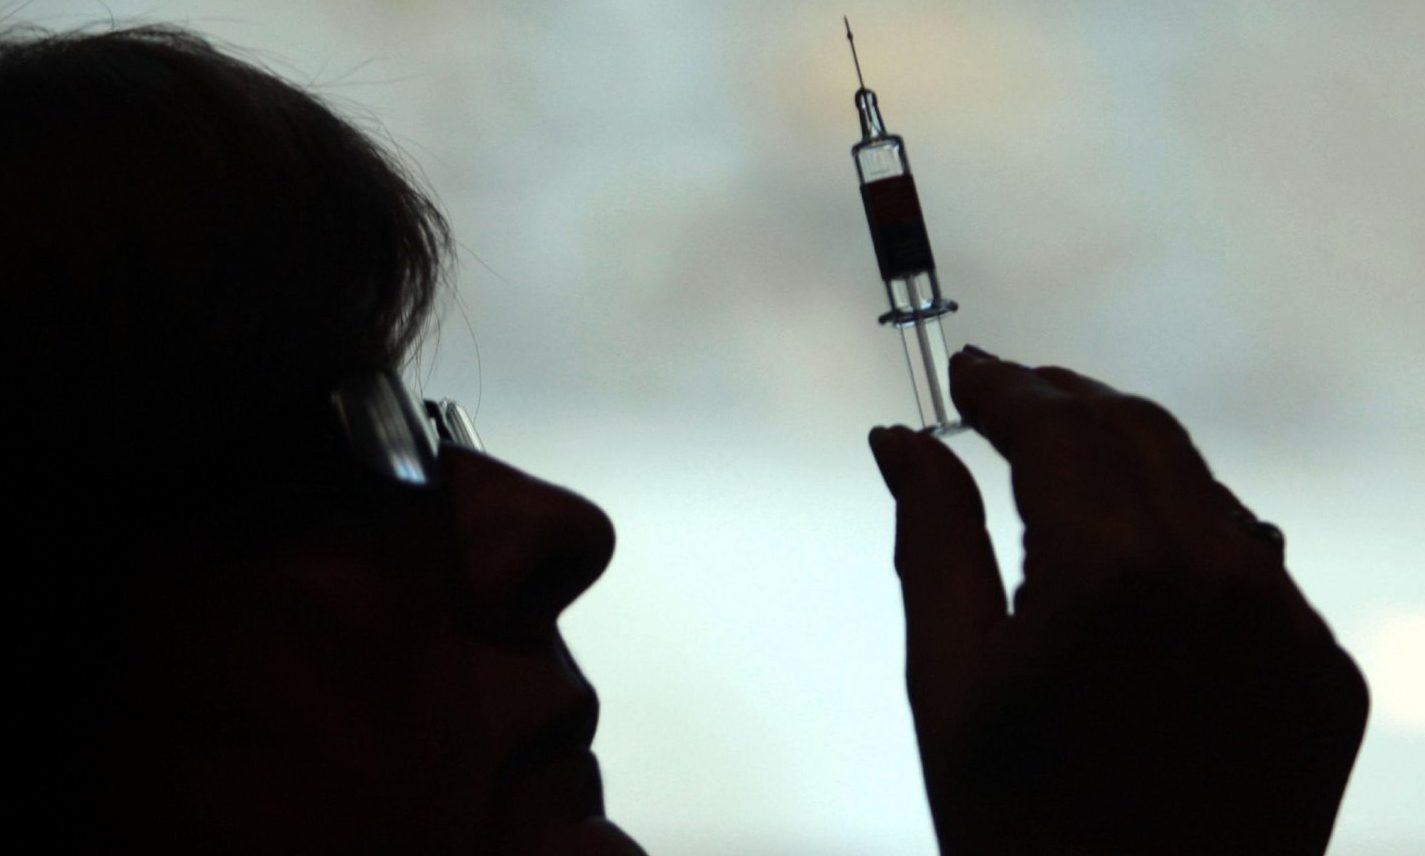 Health bosses say lessons have been learned in time for Covid vaccinations, following difficulties with the flu jab roll-out.